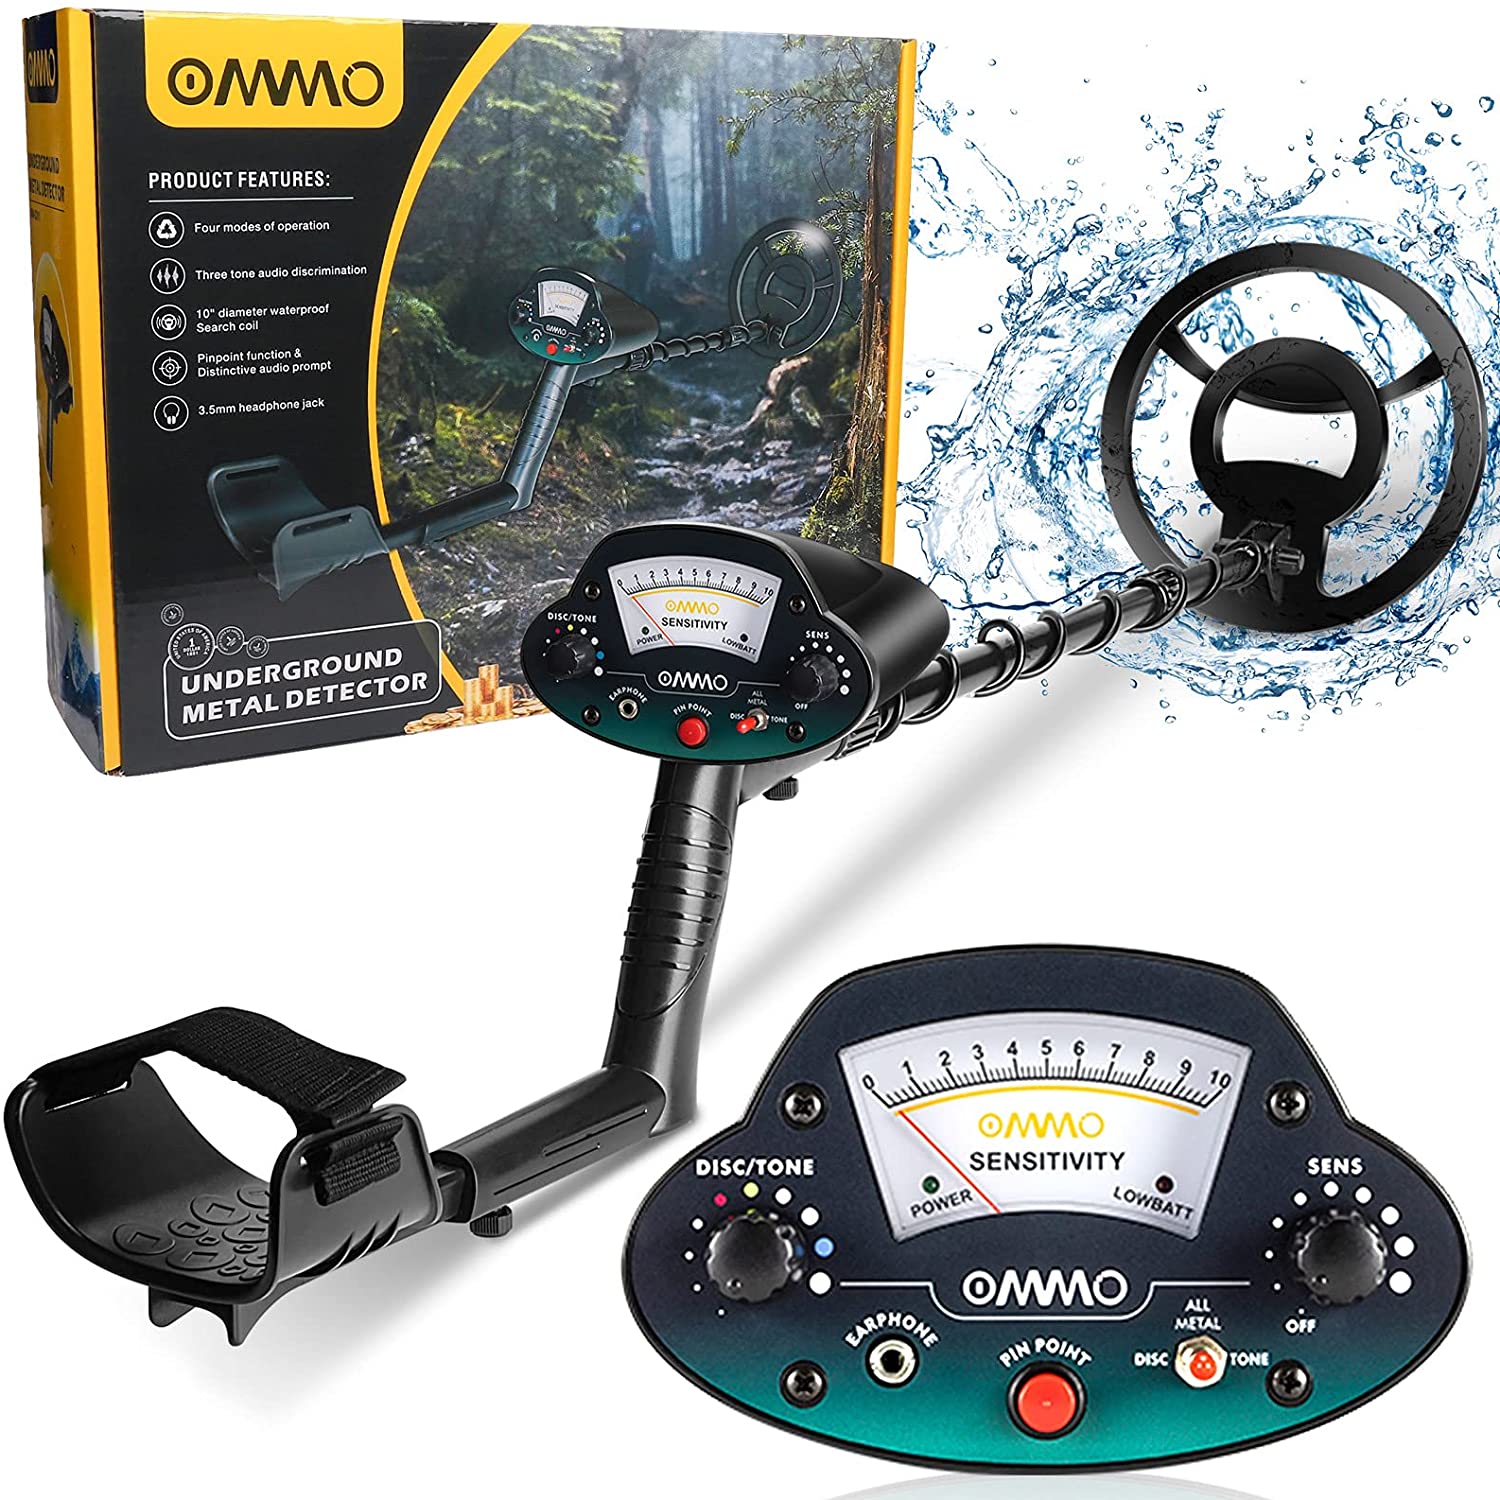 ''OMMO Metal Detector for ADULTs & Kids, Waterproof Metal Detectors with High Accuracy Adjustable Poi